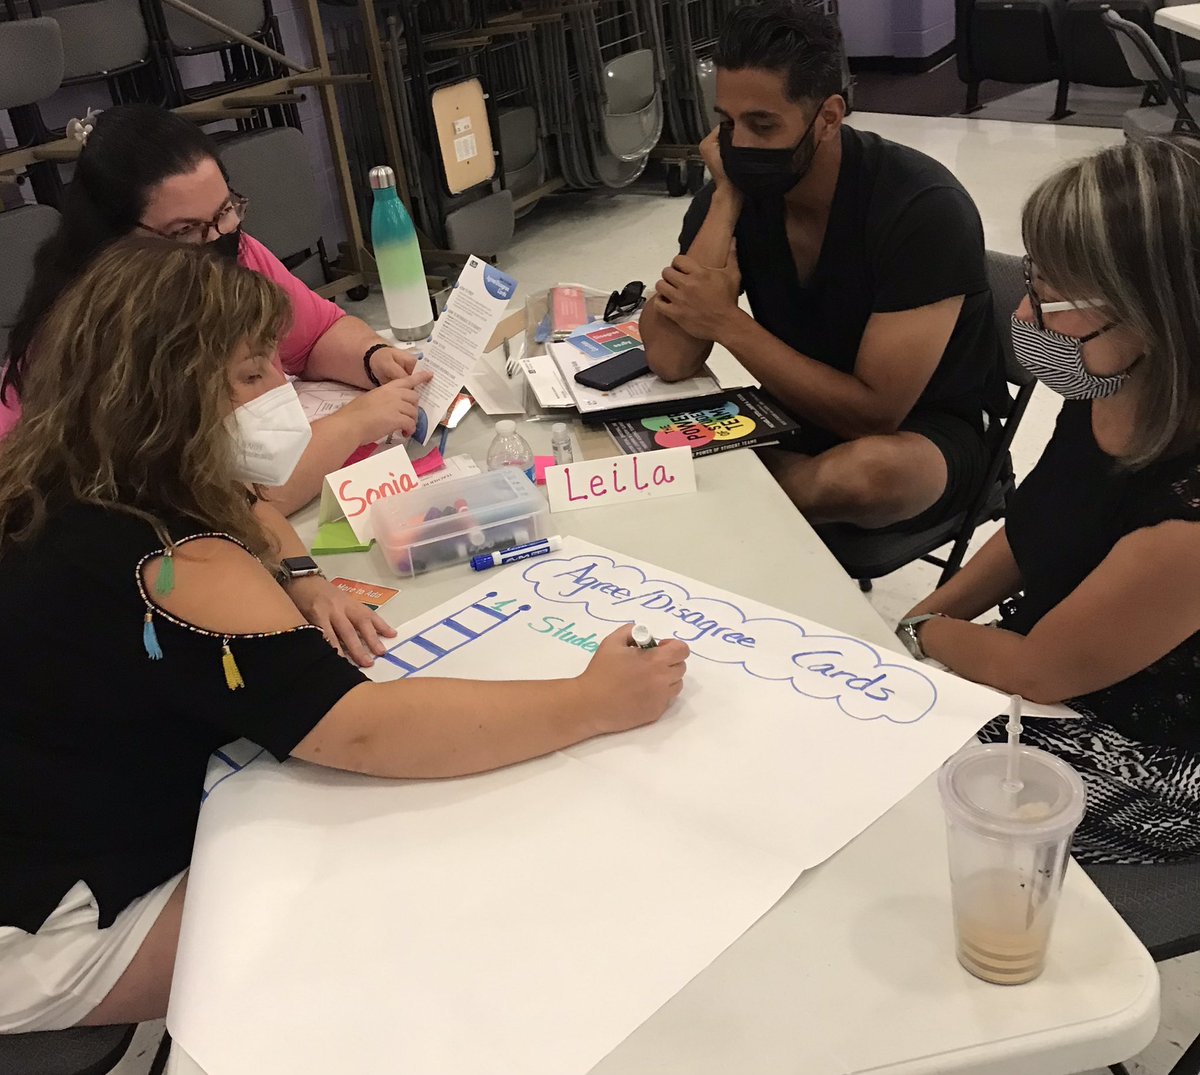 Ridge Circle Elementary: U46 Illinois.  Focused teamwork … prepping for the new school year of teaming!
@sdu46 @Learn_Sci